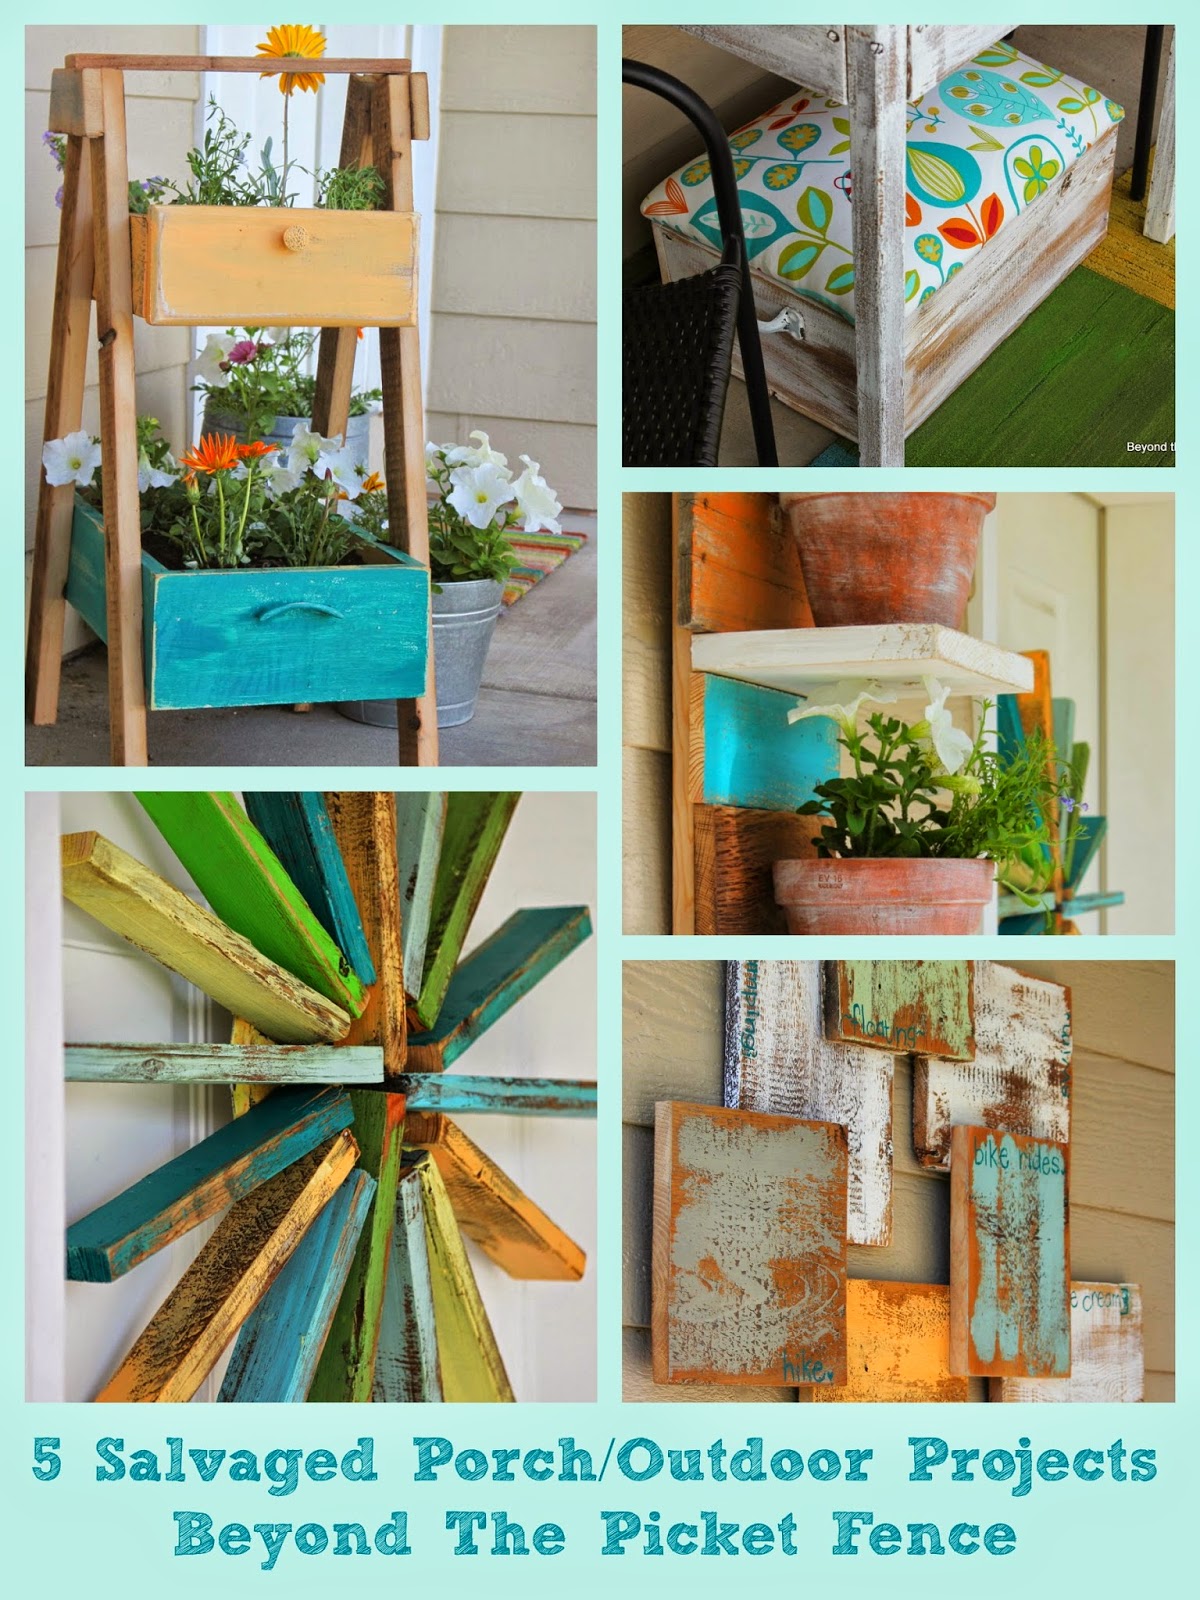 Upcycled Salvaged Porch Projects http://bec4-beyondthepicketfence.blogspot.com/2014/05/porch-projects-roundup-link-party-and.html